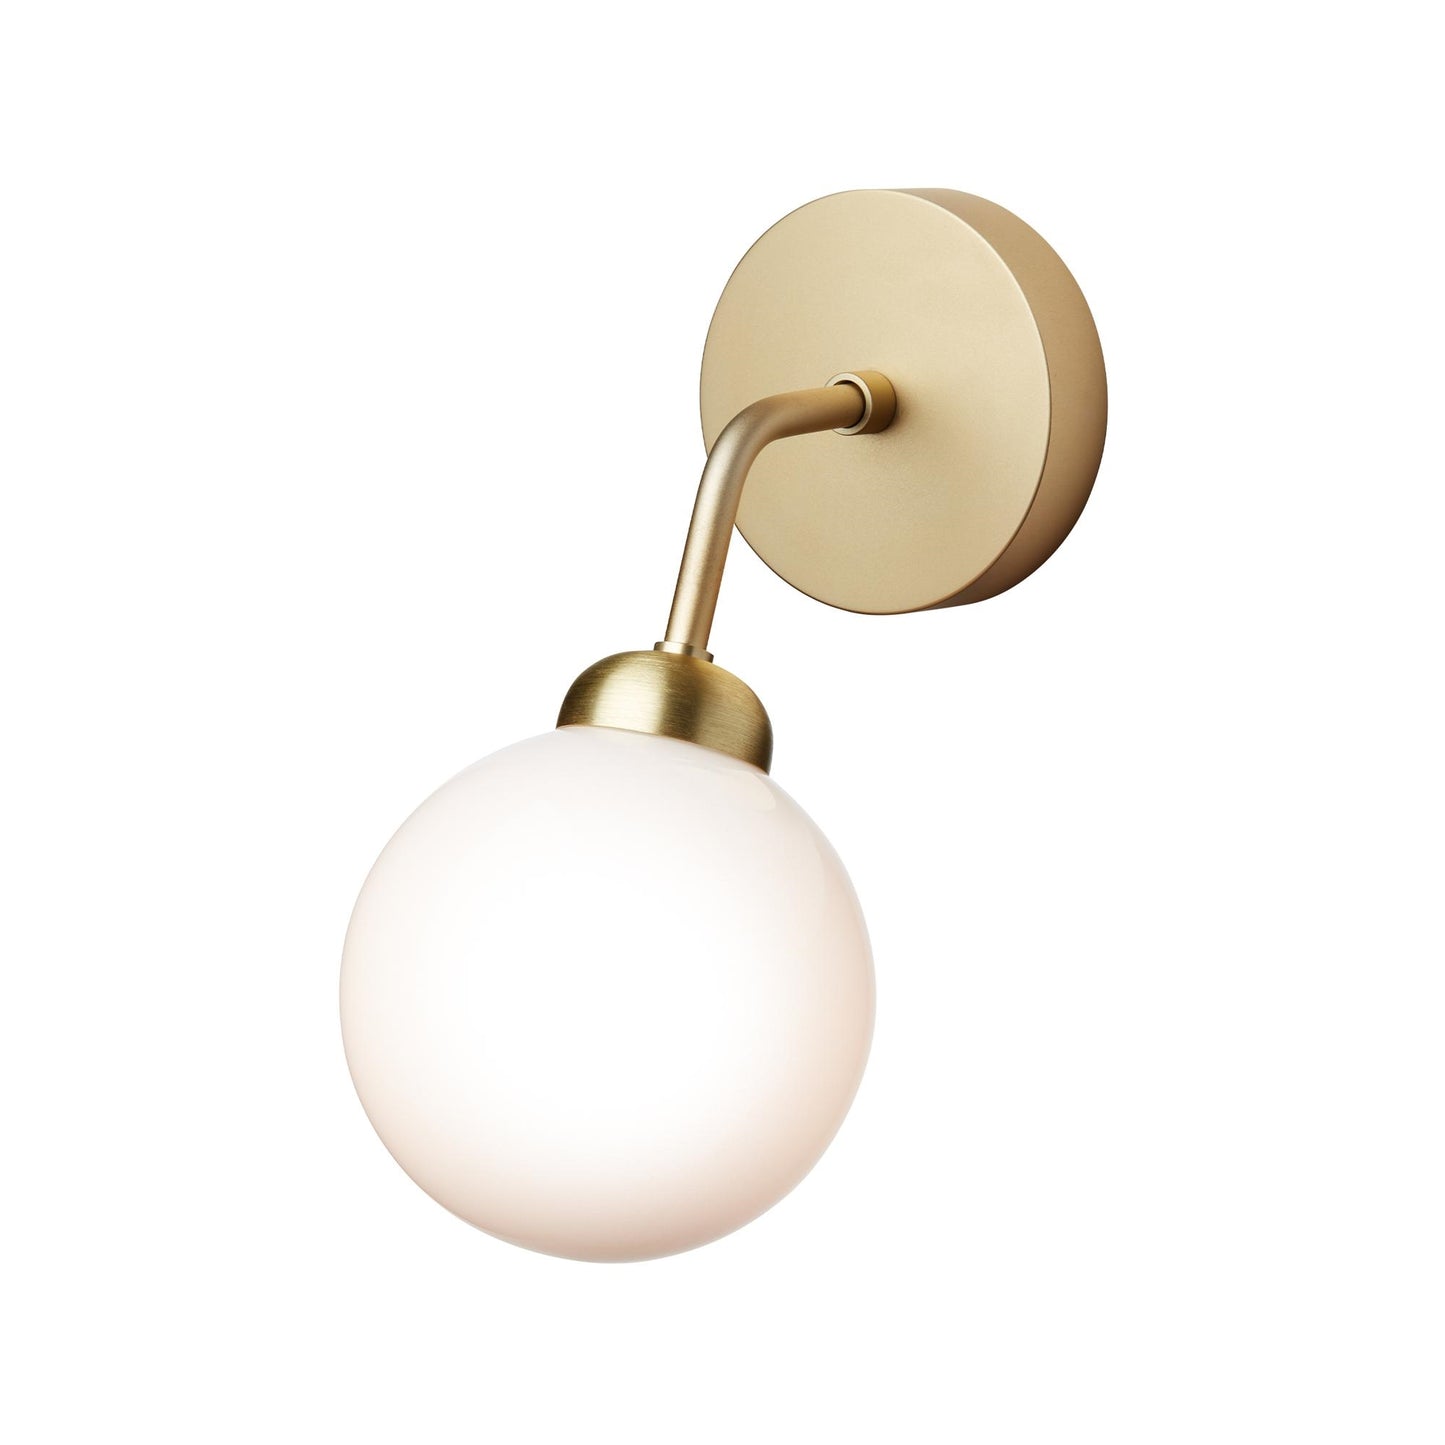 Apiales Wall Lamp by Nuura #Brushed Brass